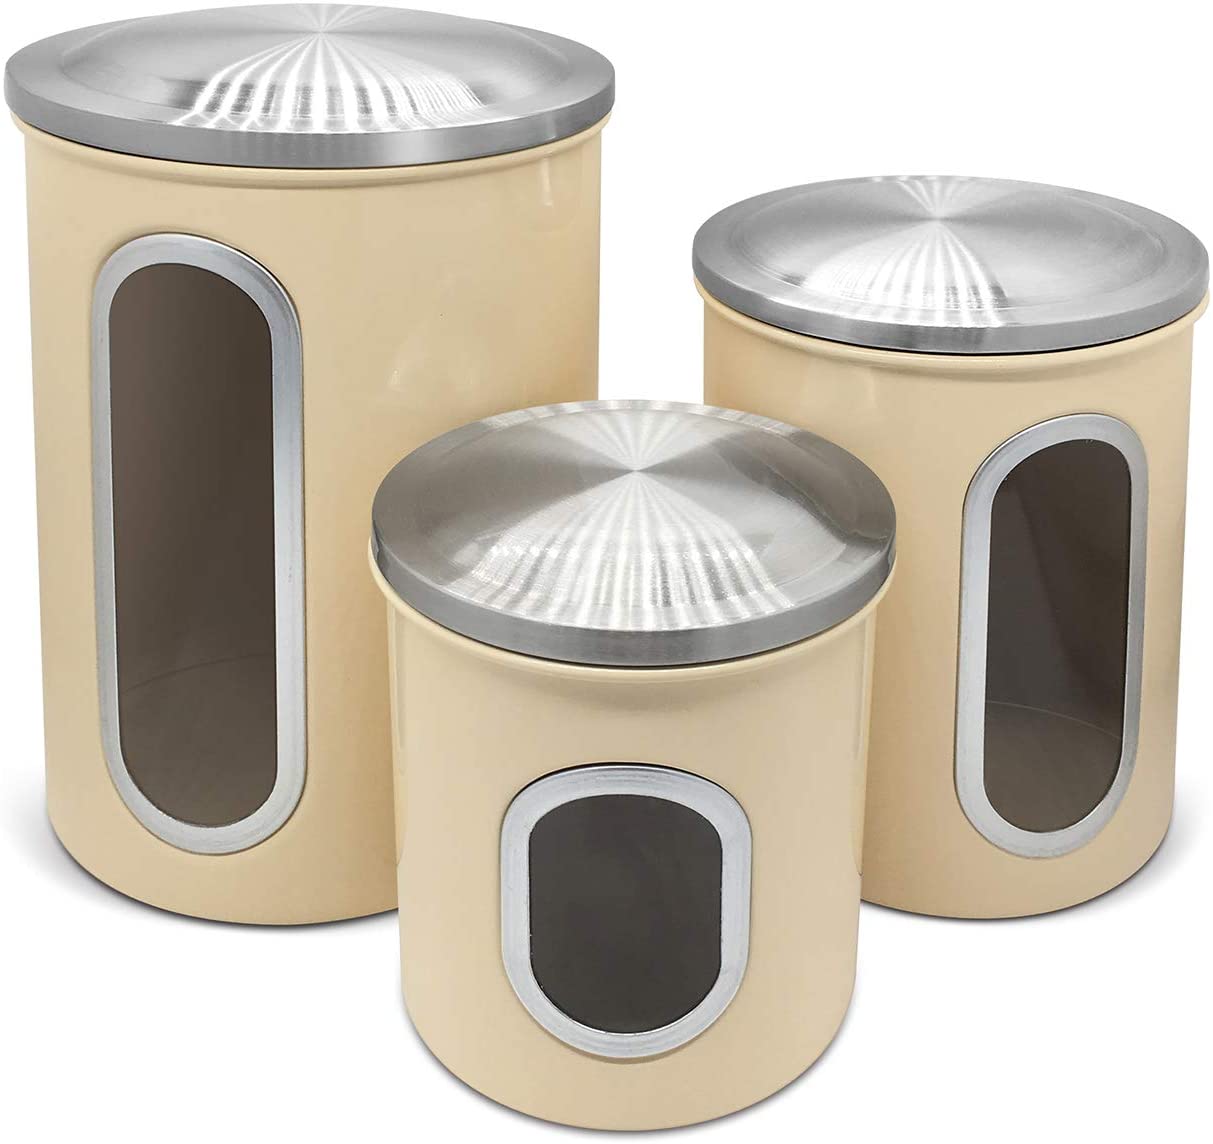 Fortune Candy Stainless Steel Canister Sets with Anti-Fingerprint Lid and Visible Window, Cereal Container Set of 3 (Pale Yellow)